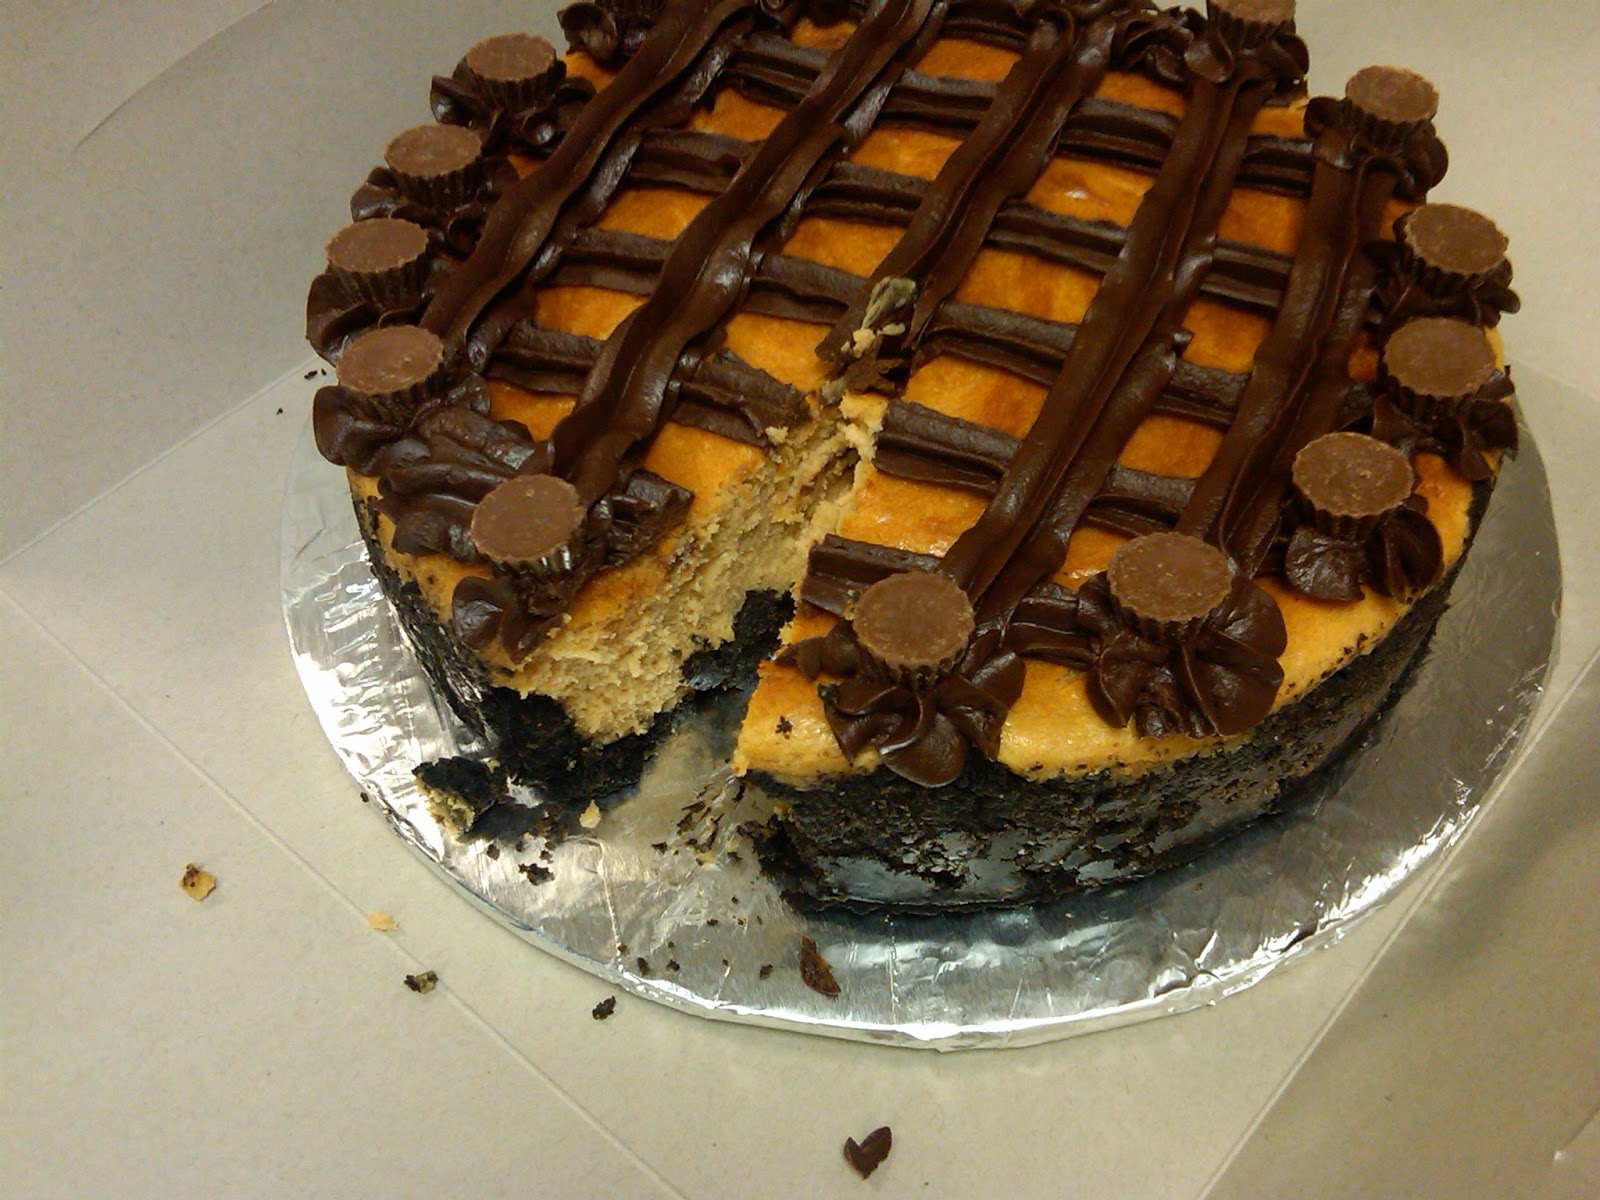 Peanut Butter Cheesecake topped with Chocolate Ganache Lattice